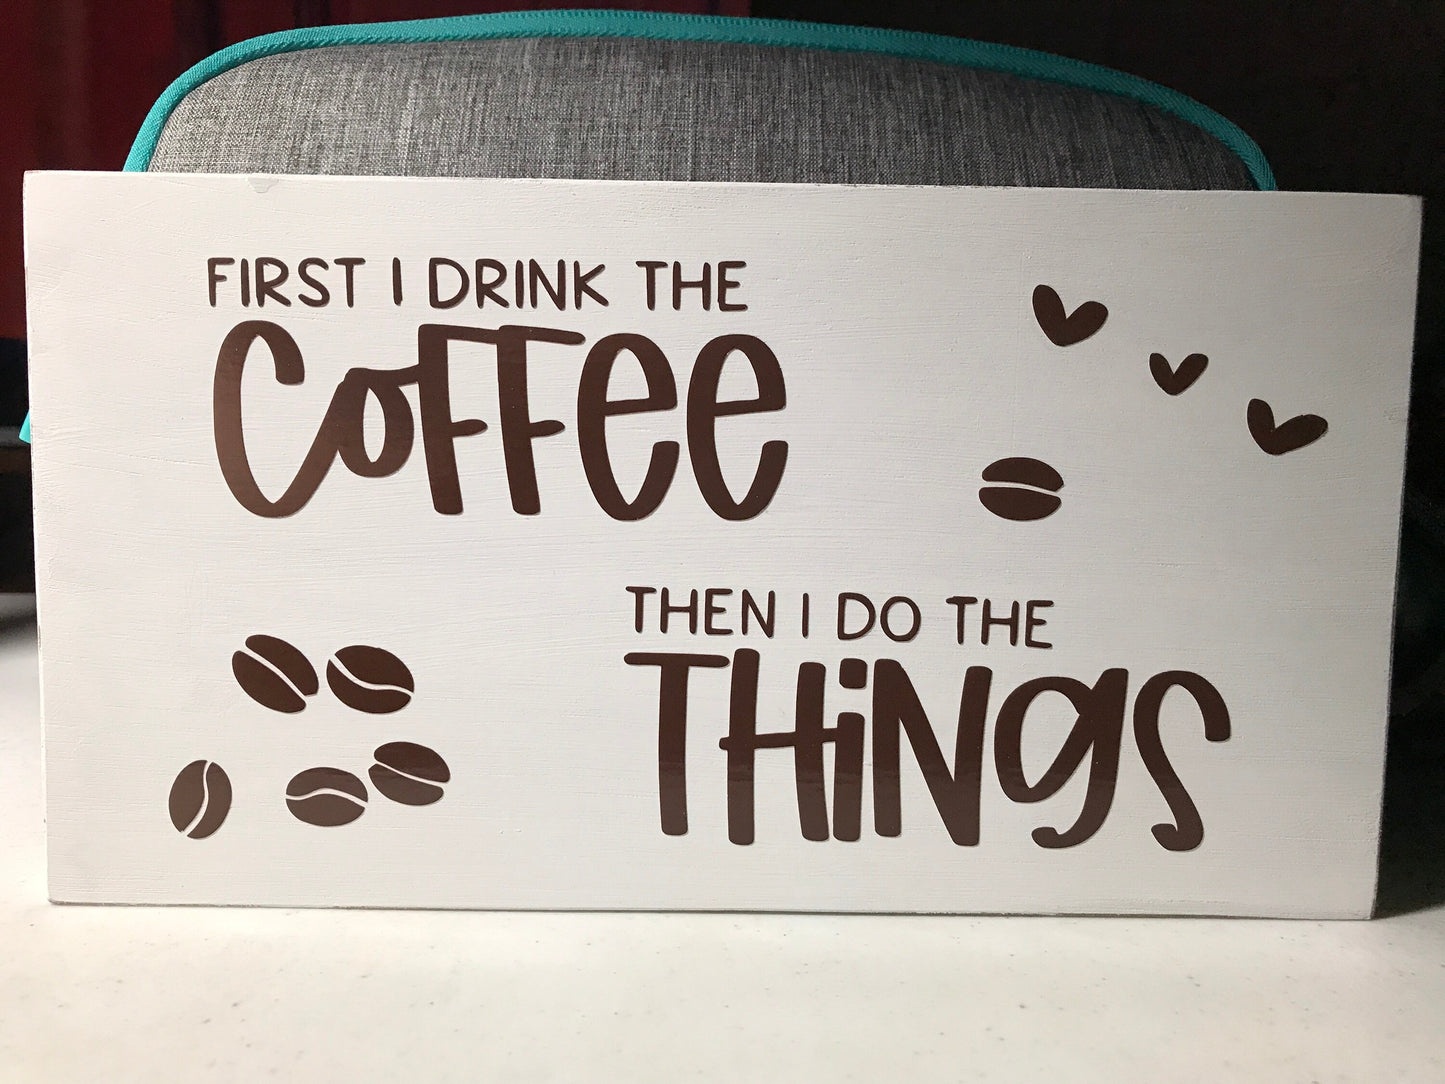 First I Drink the Coffee Wood Kitchen Decor Sign 9x5” Wood Block, Lettering in Chocolate Brown Permanent Vinyl, Farmhouse Cafe Decor